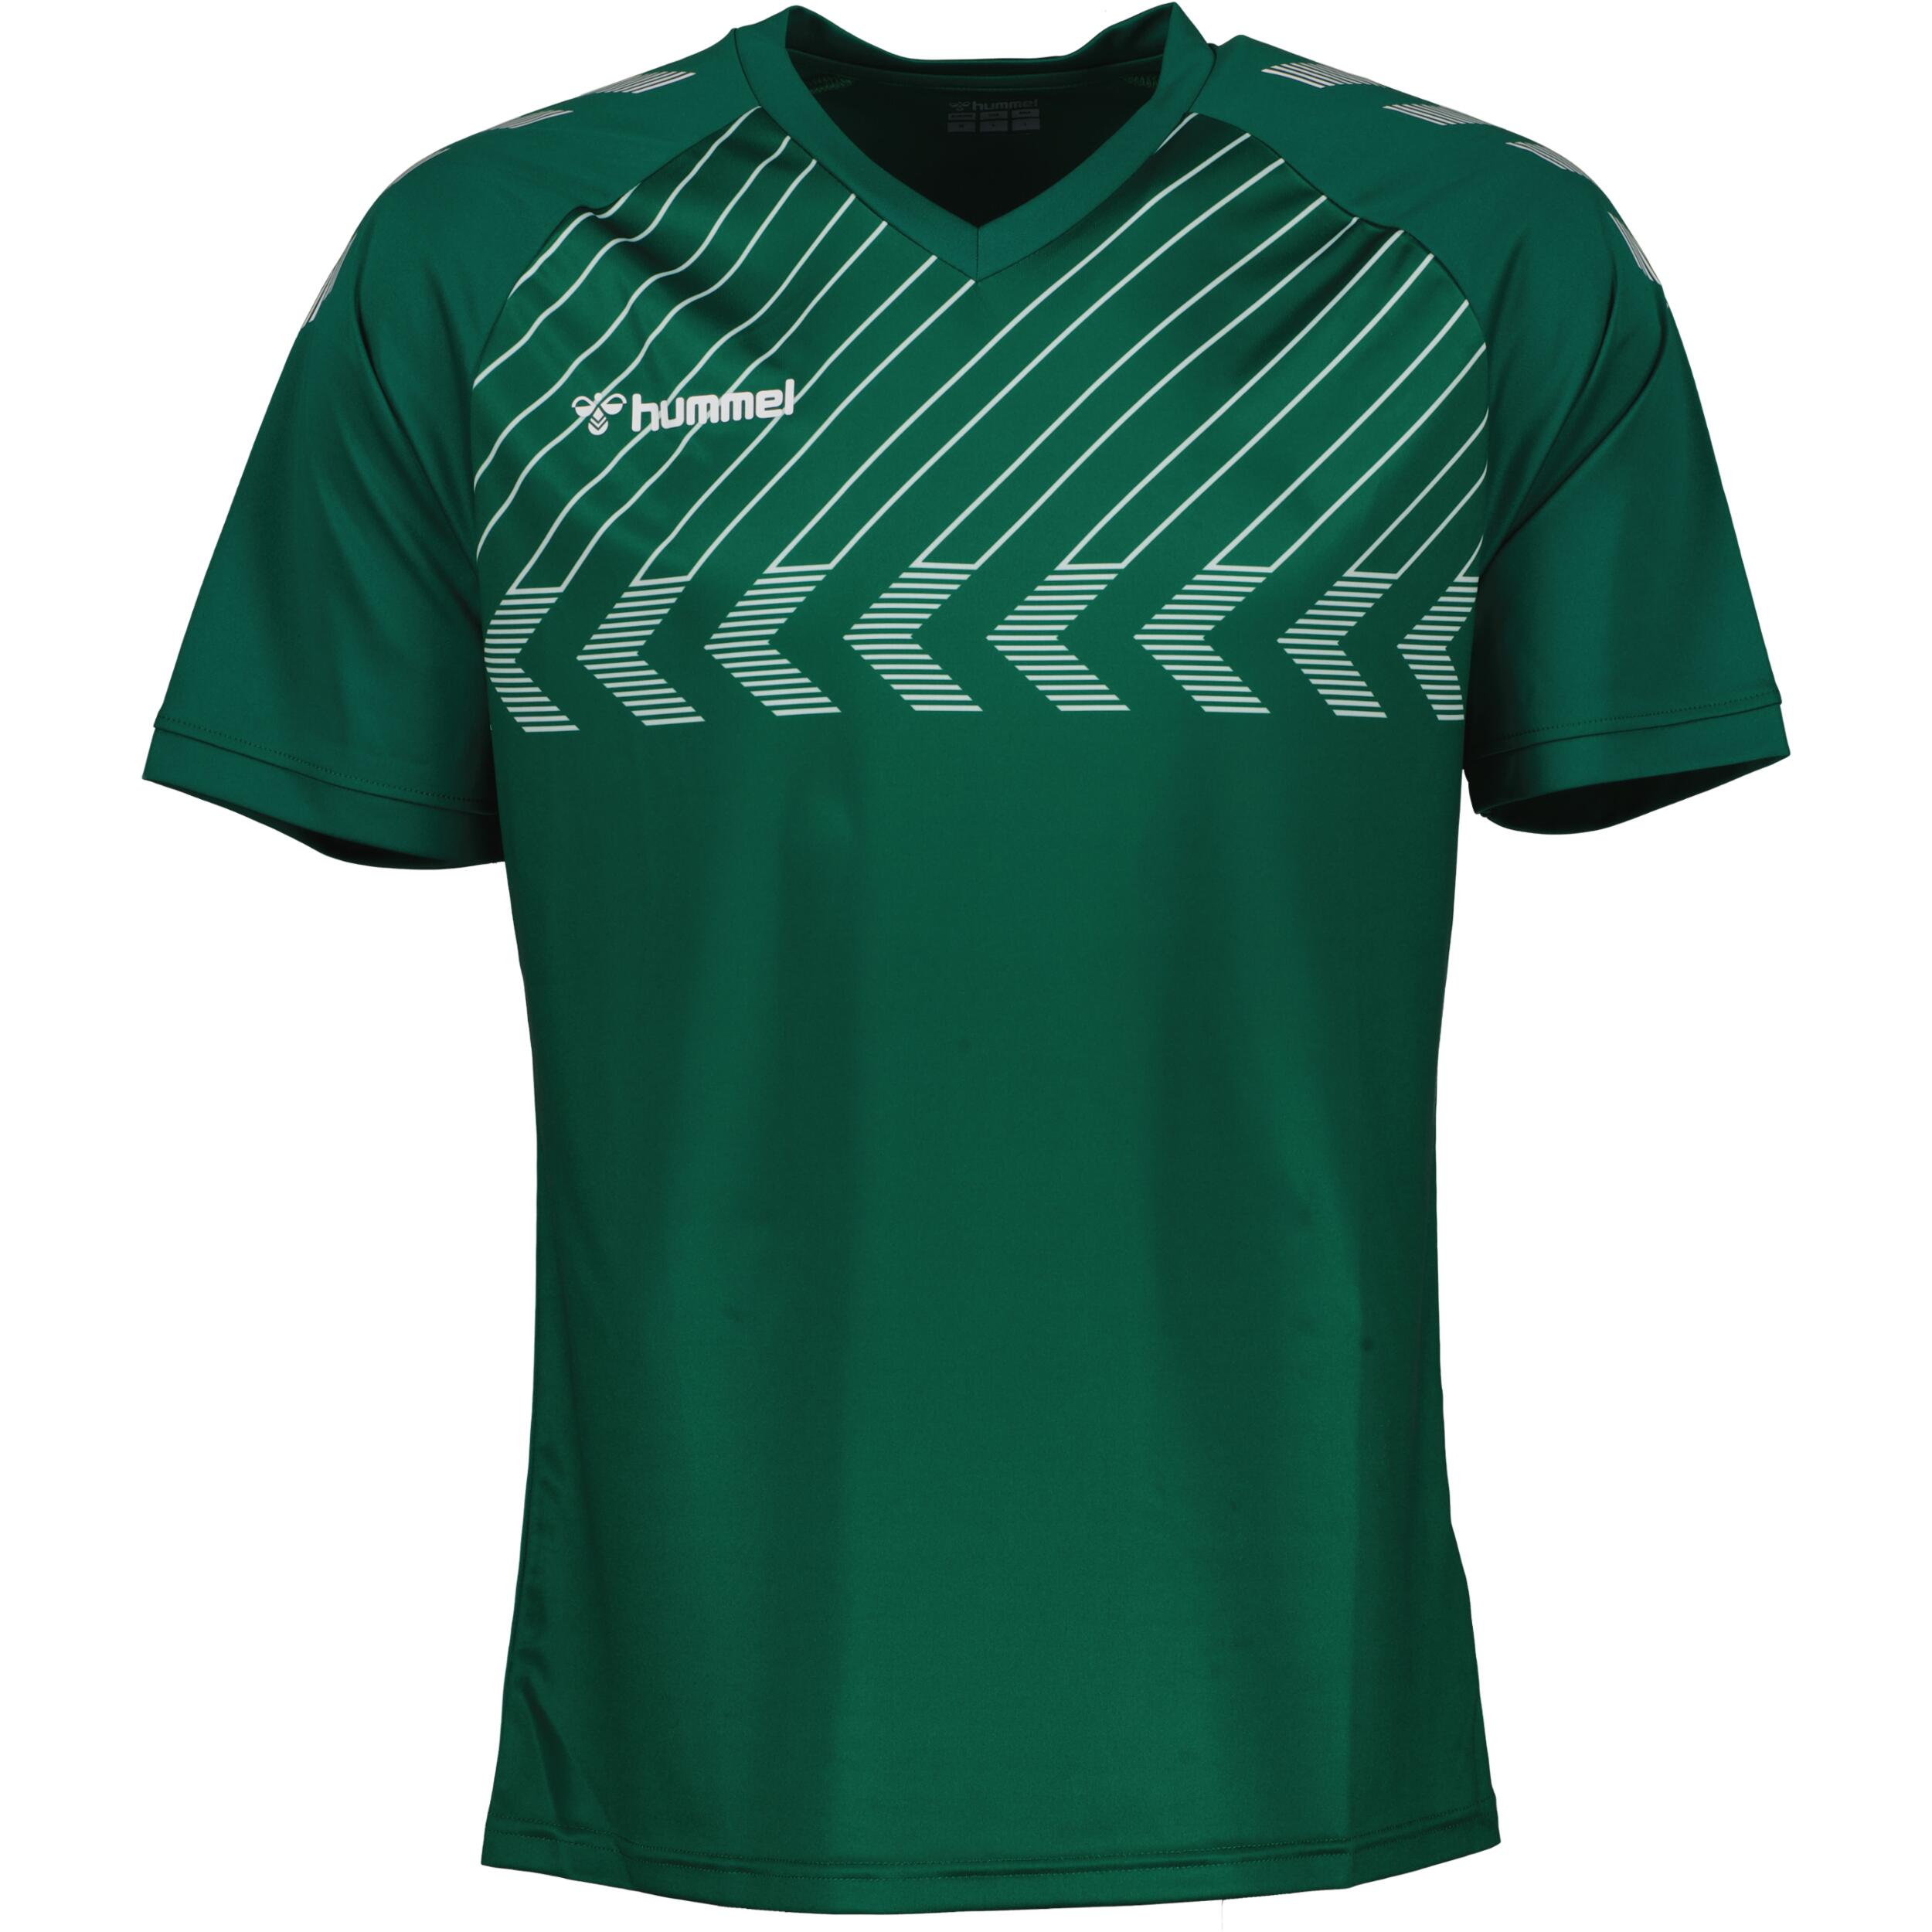 HUMMEL Poly jersey for kids, great for football, in evergreen